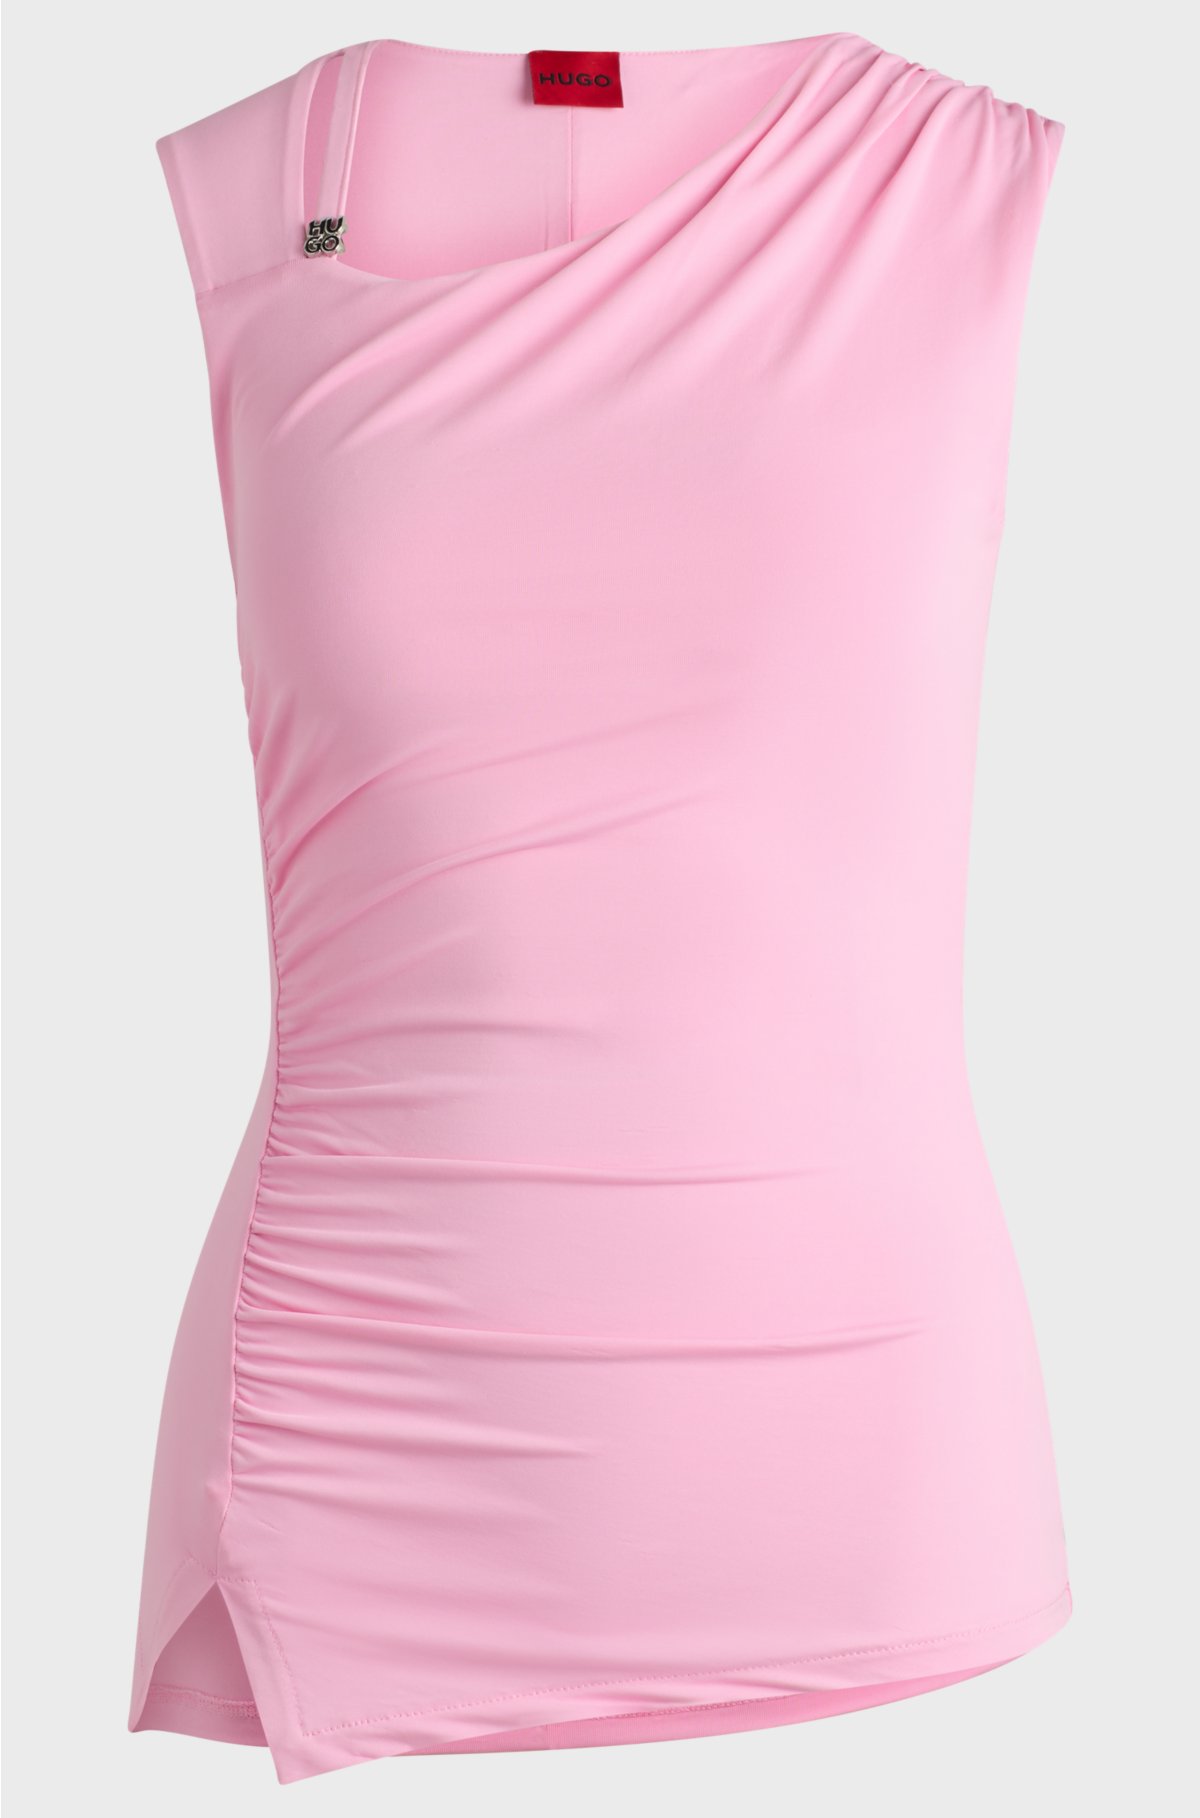 Slim-fit top with asymmetric details and stacked logo, light pink